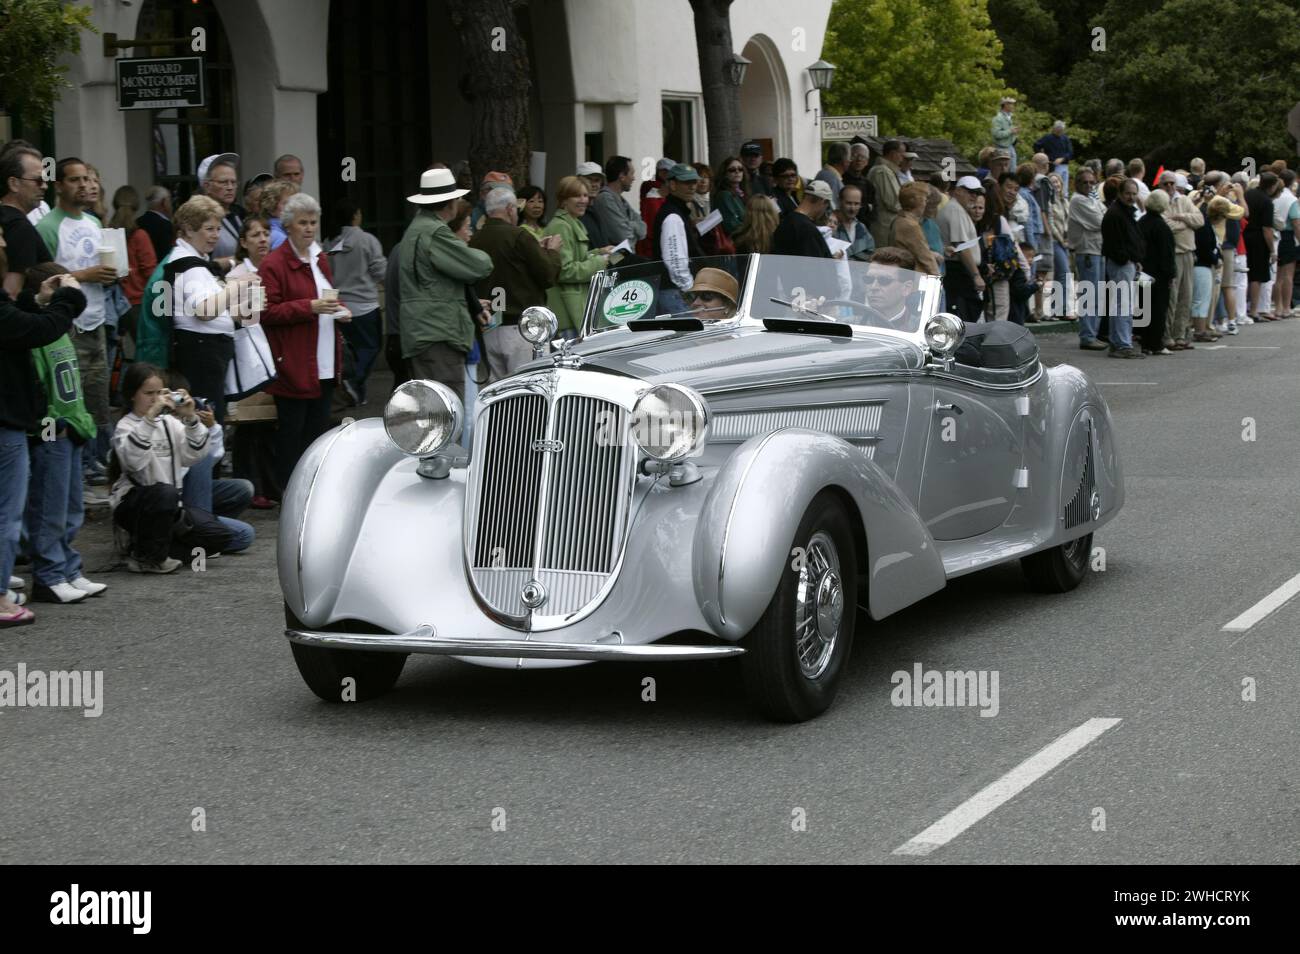 1938 Horch 853 Special Roadster automobile classic car Stock Photo